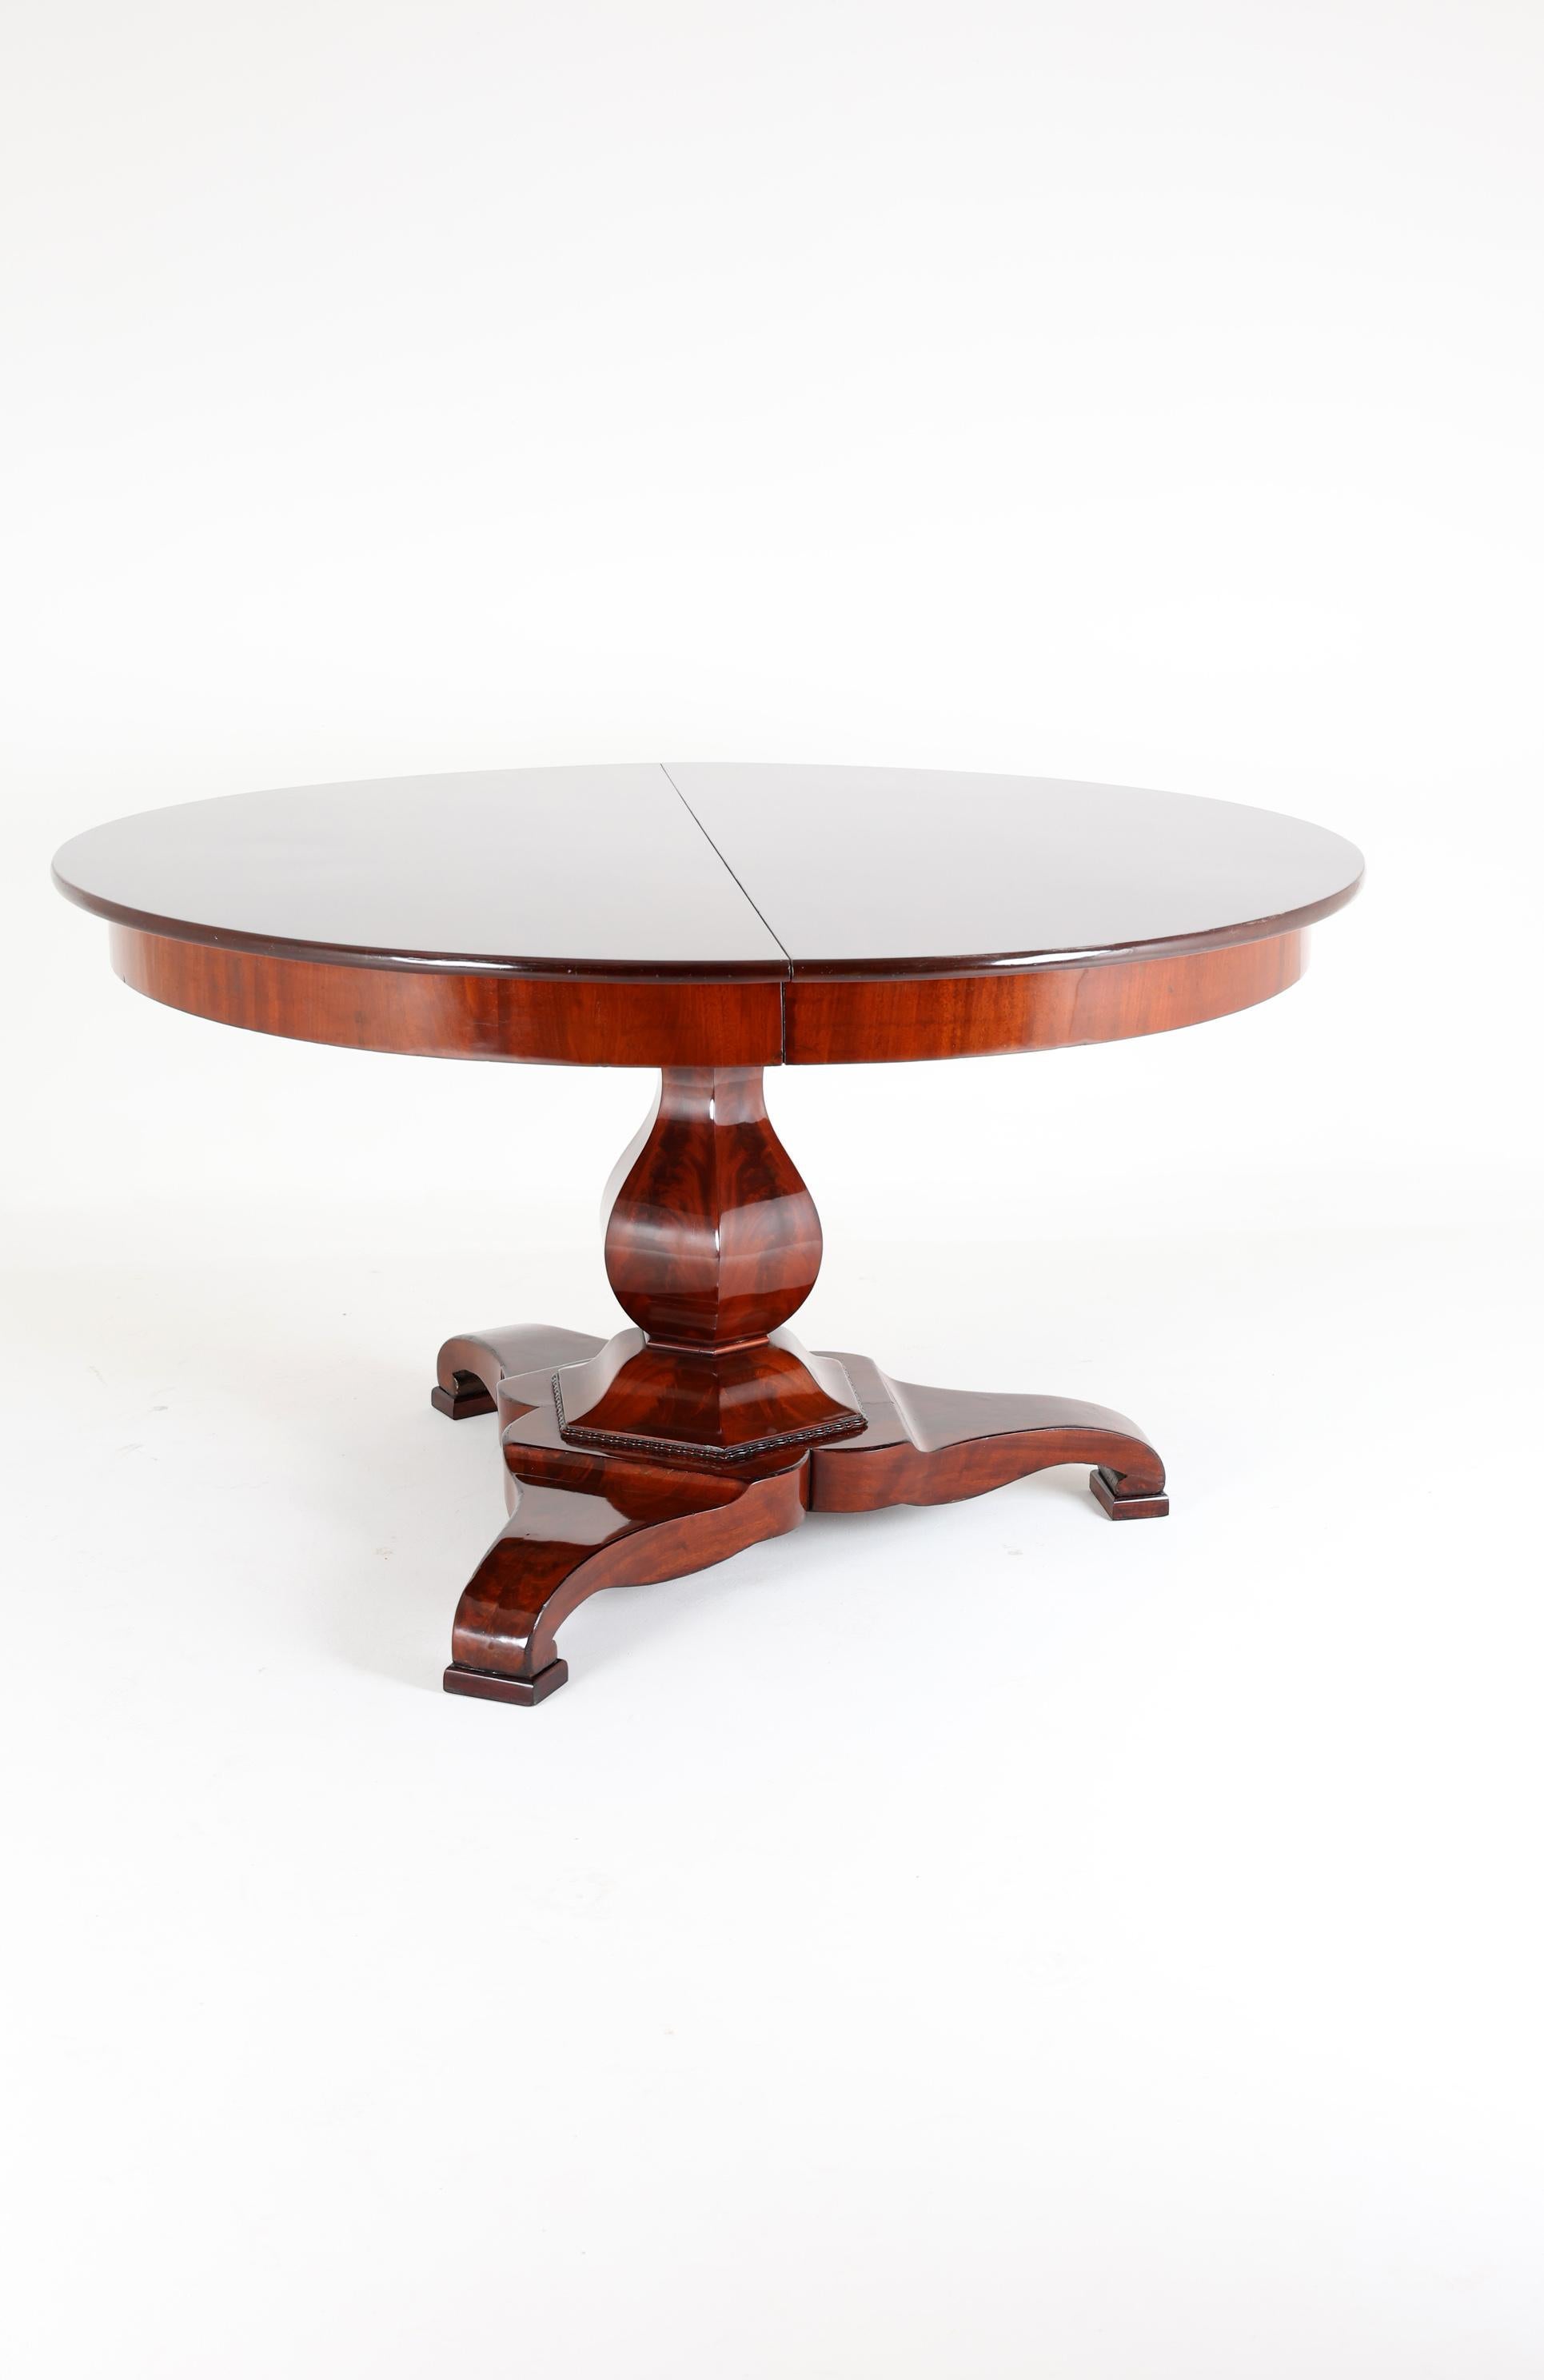 19th Century Mahogany Dining Room Table, 177 inches Long For Sale 9